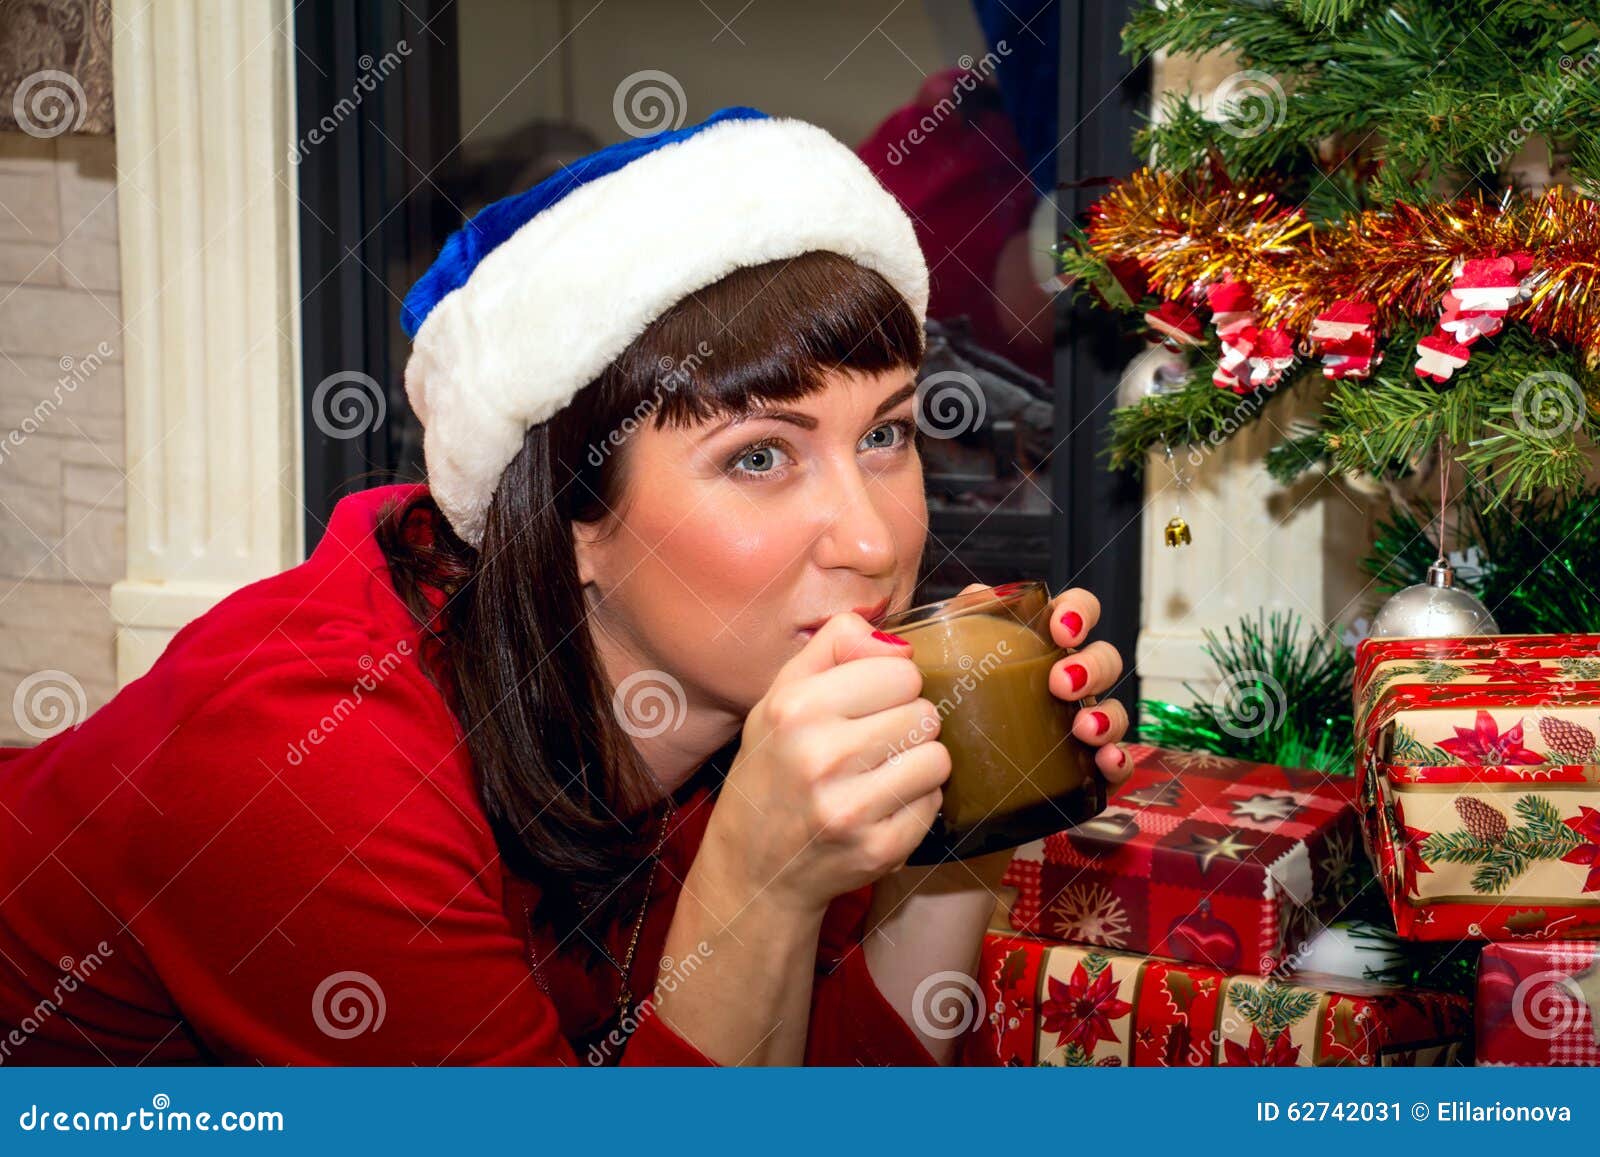 Young Beautiful Woman Drinking Cocoa. Stock Image - Image of brown ...